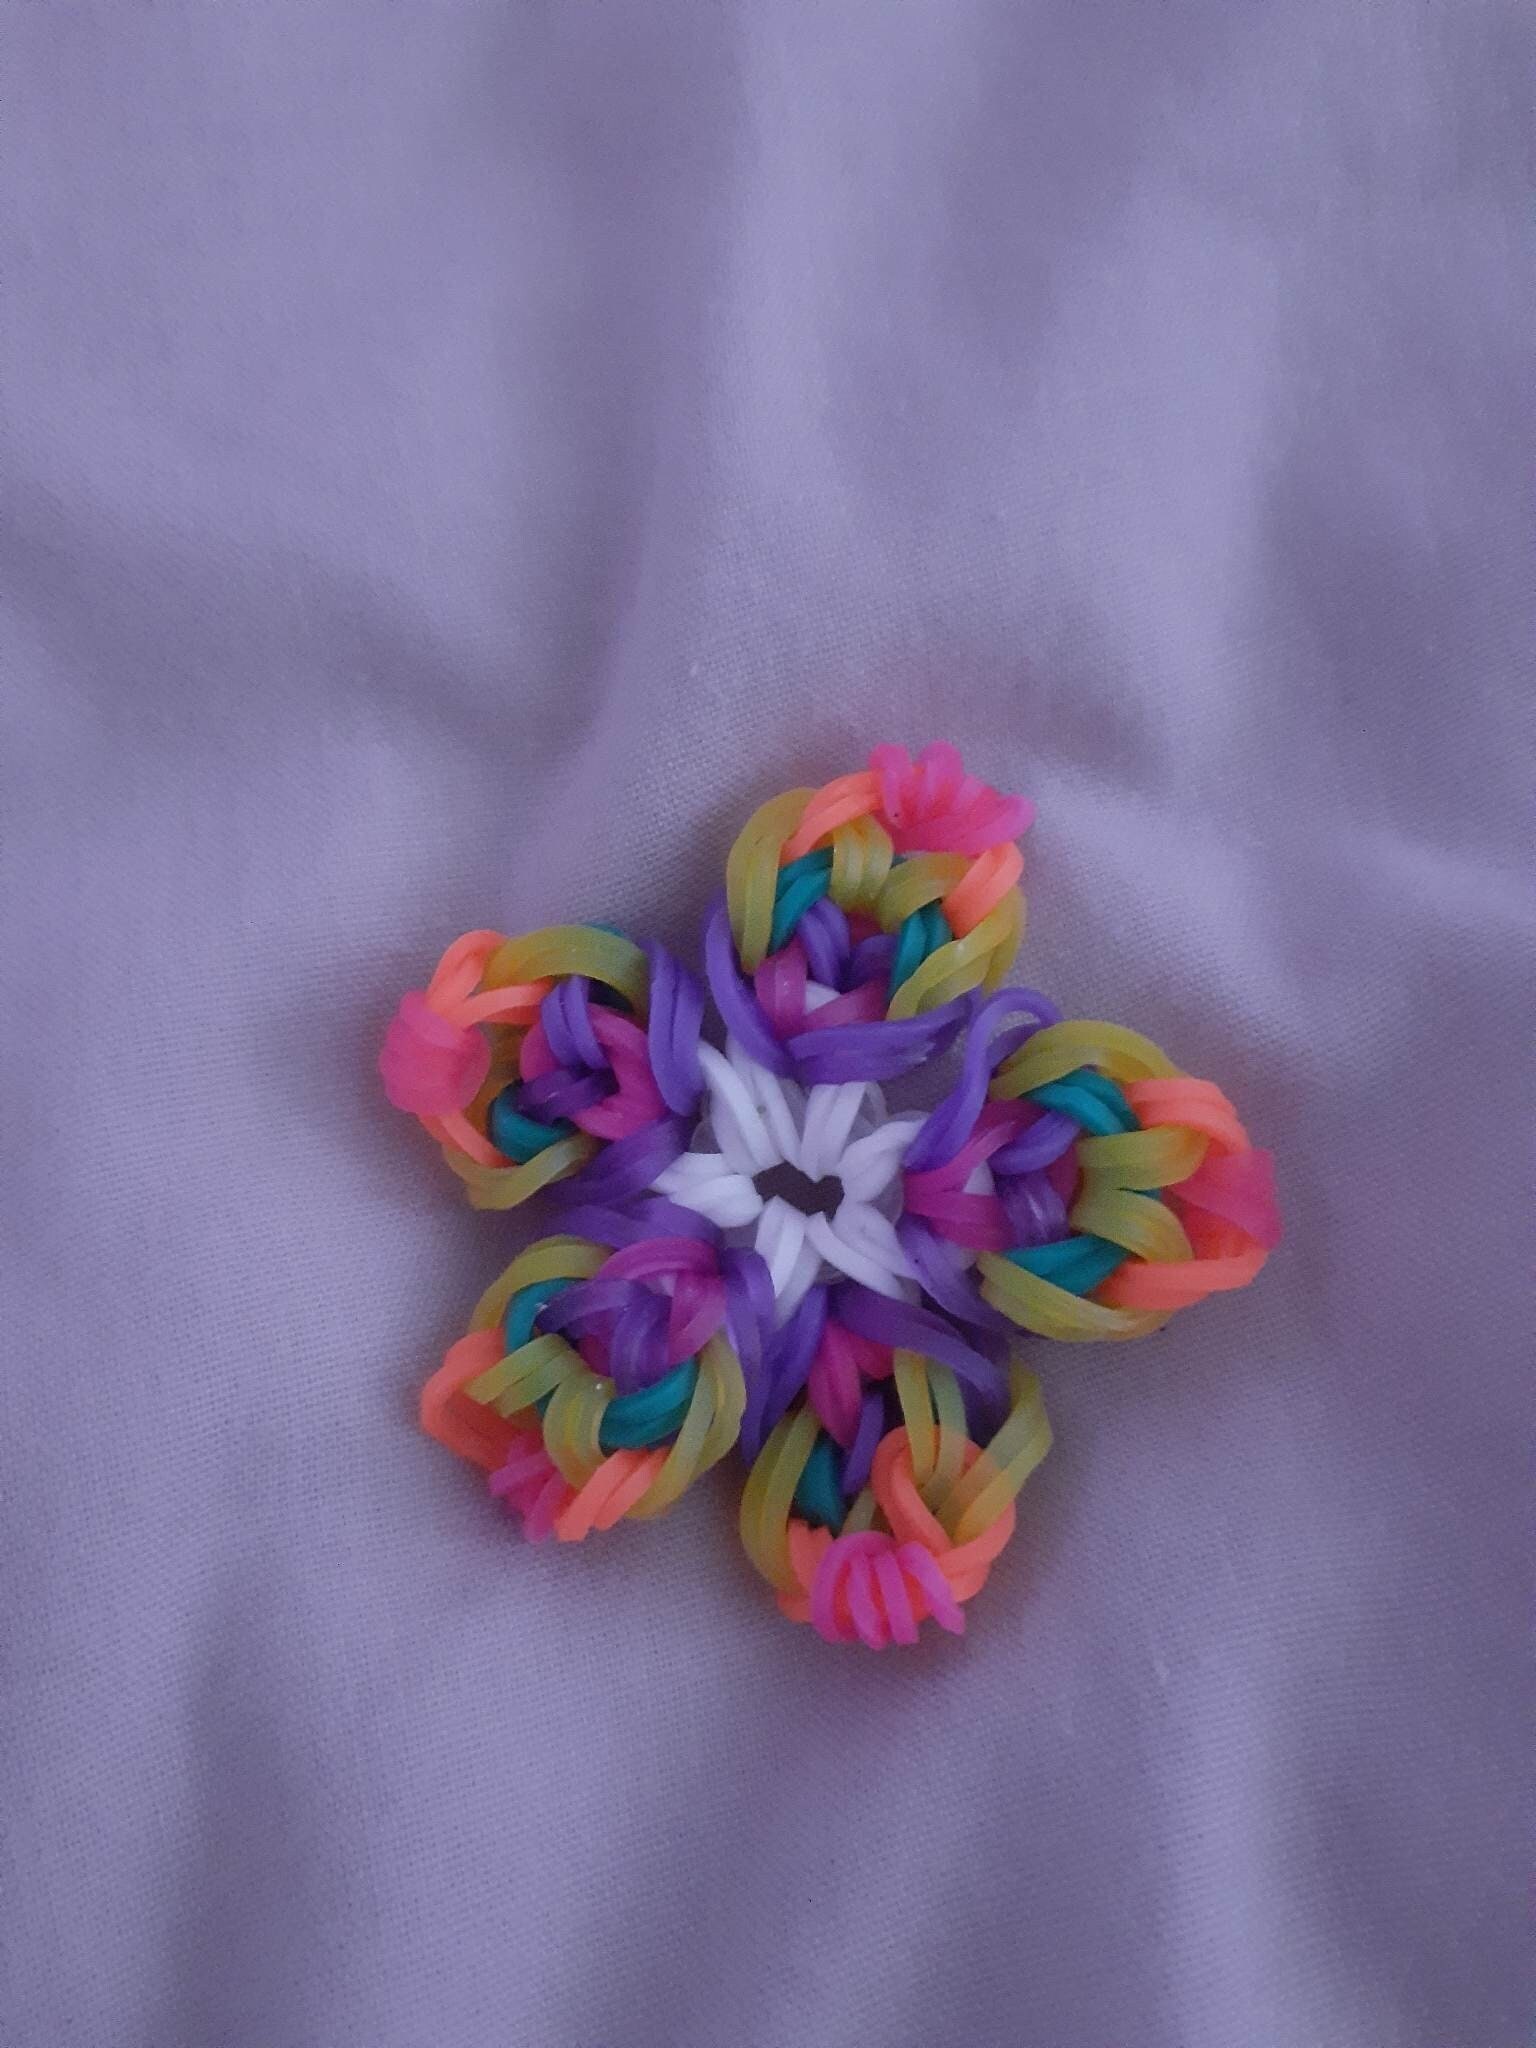 LGBTQ+ Pride Flags Inspired Rainbow Loom Flower Charms - Also Available As A Keychain!